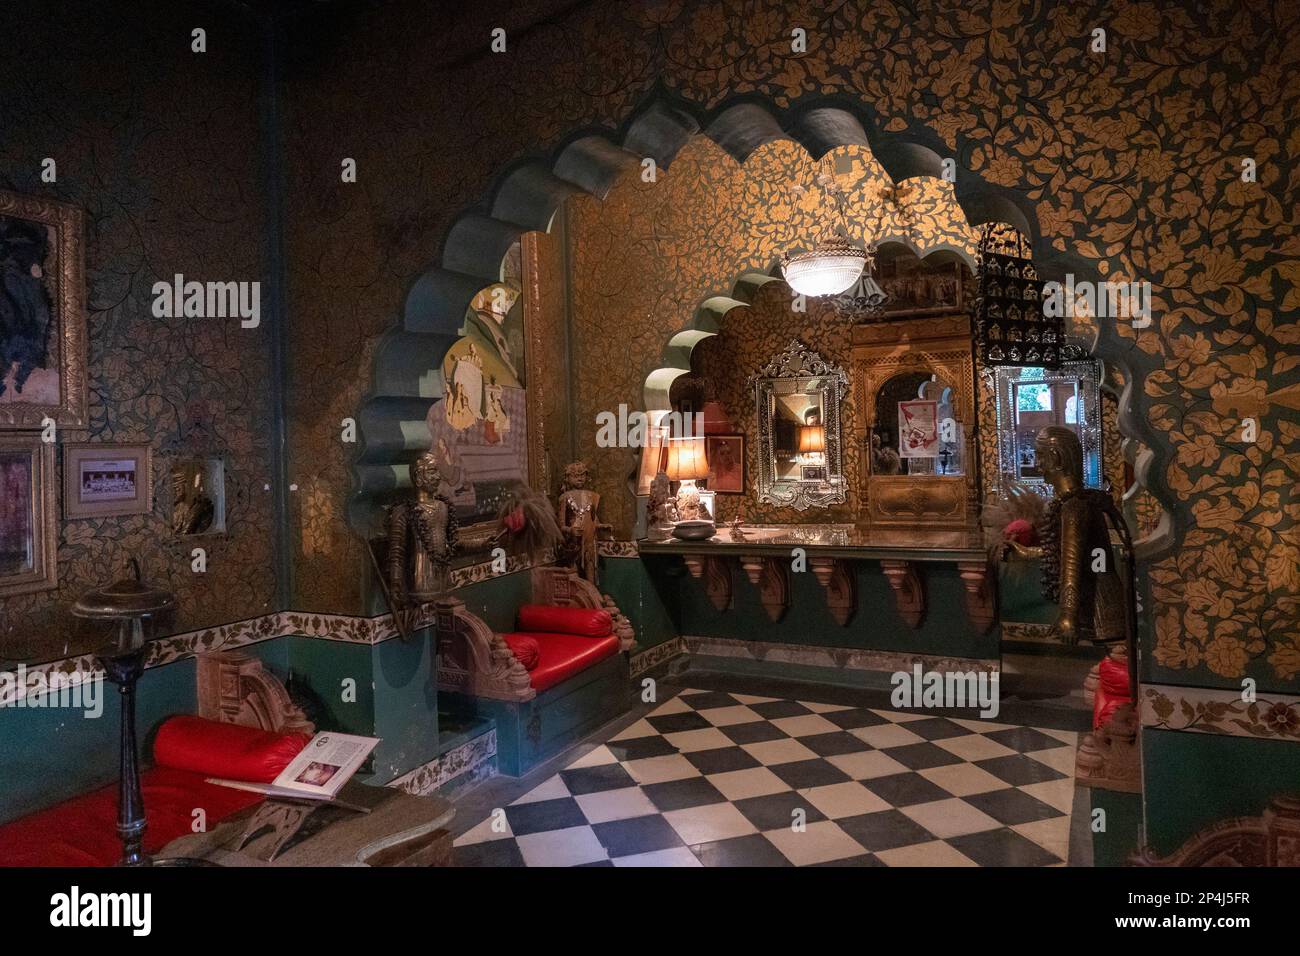 India, Rajasthan, Bikaner, Bhairon Vilas Heritage Hotel, traditionally decorated reception with painted walls Stock Photo